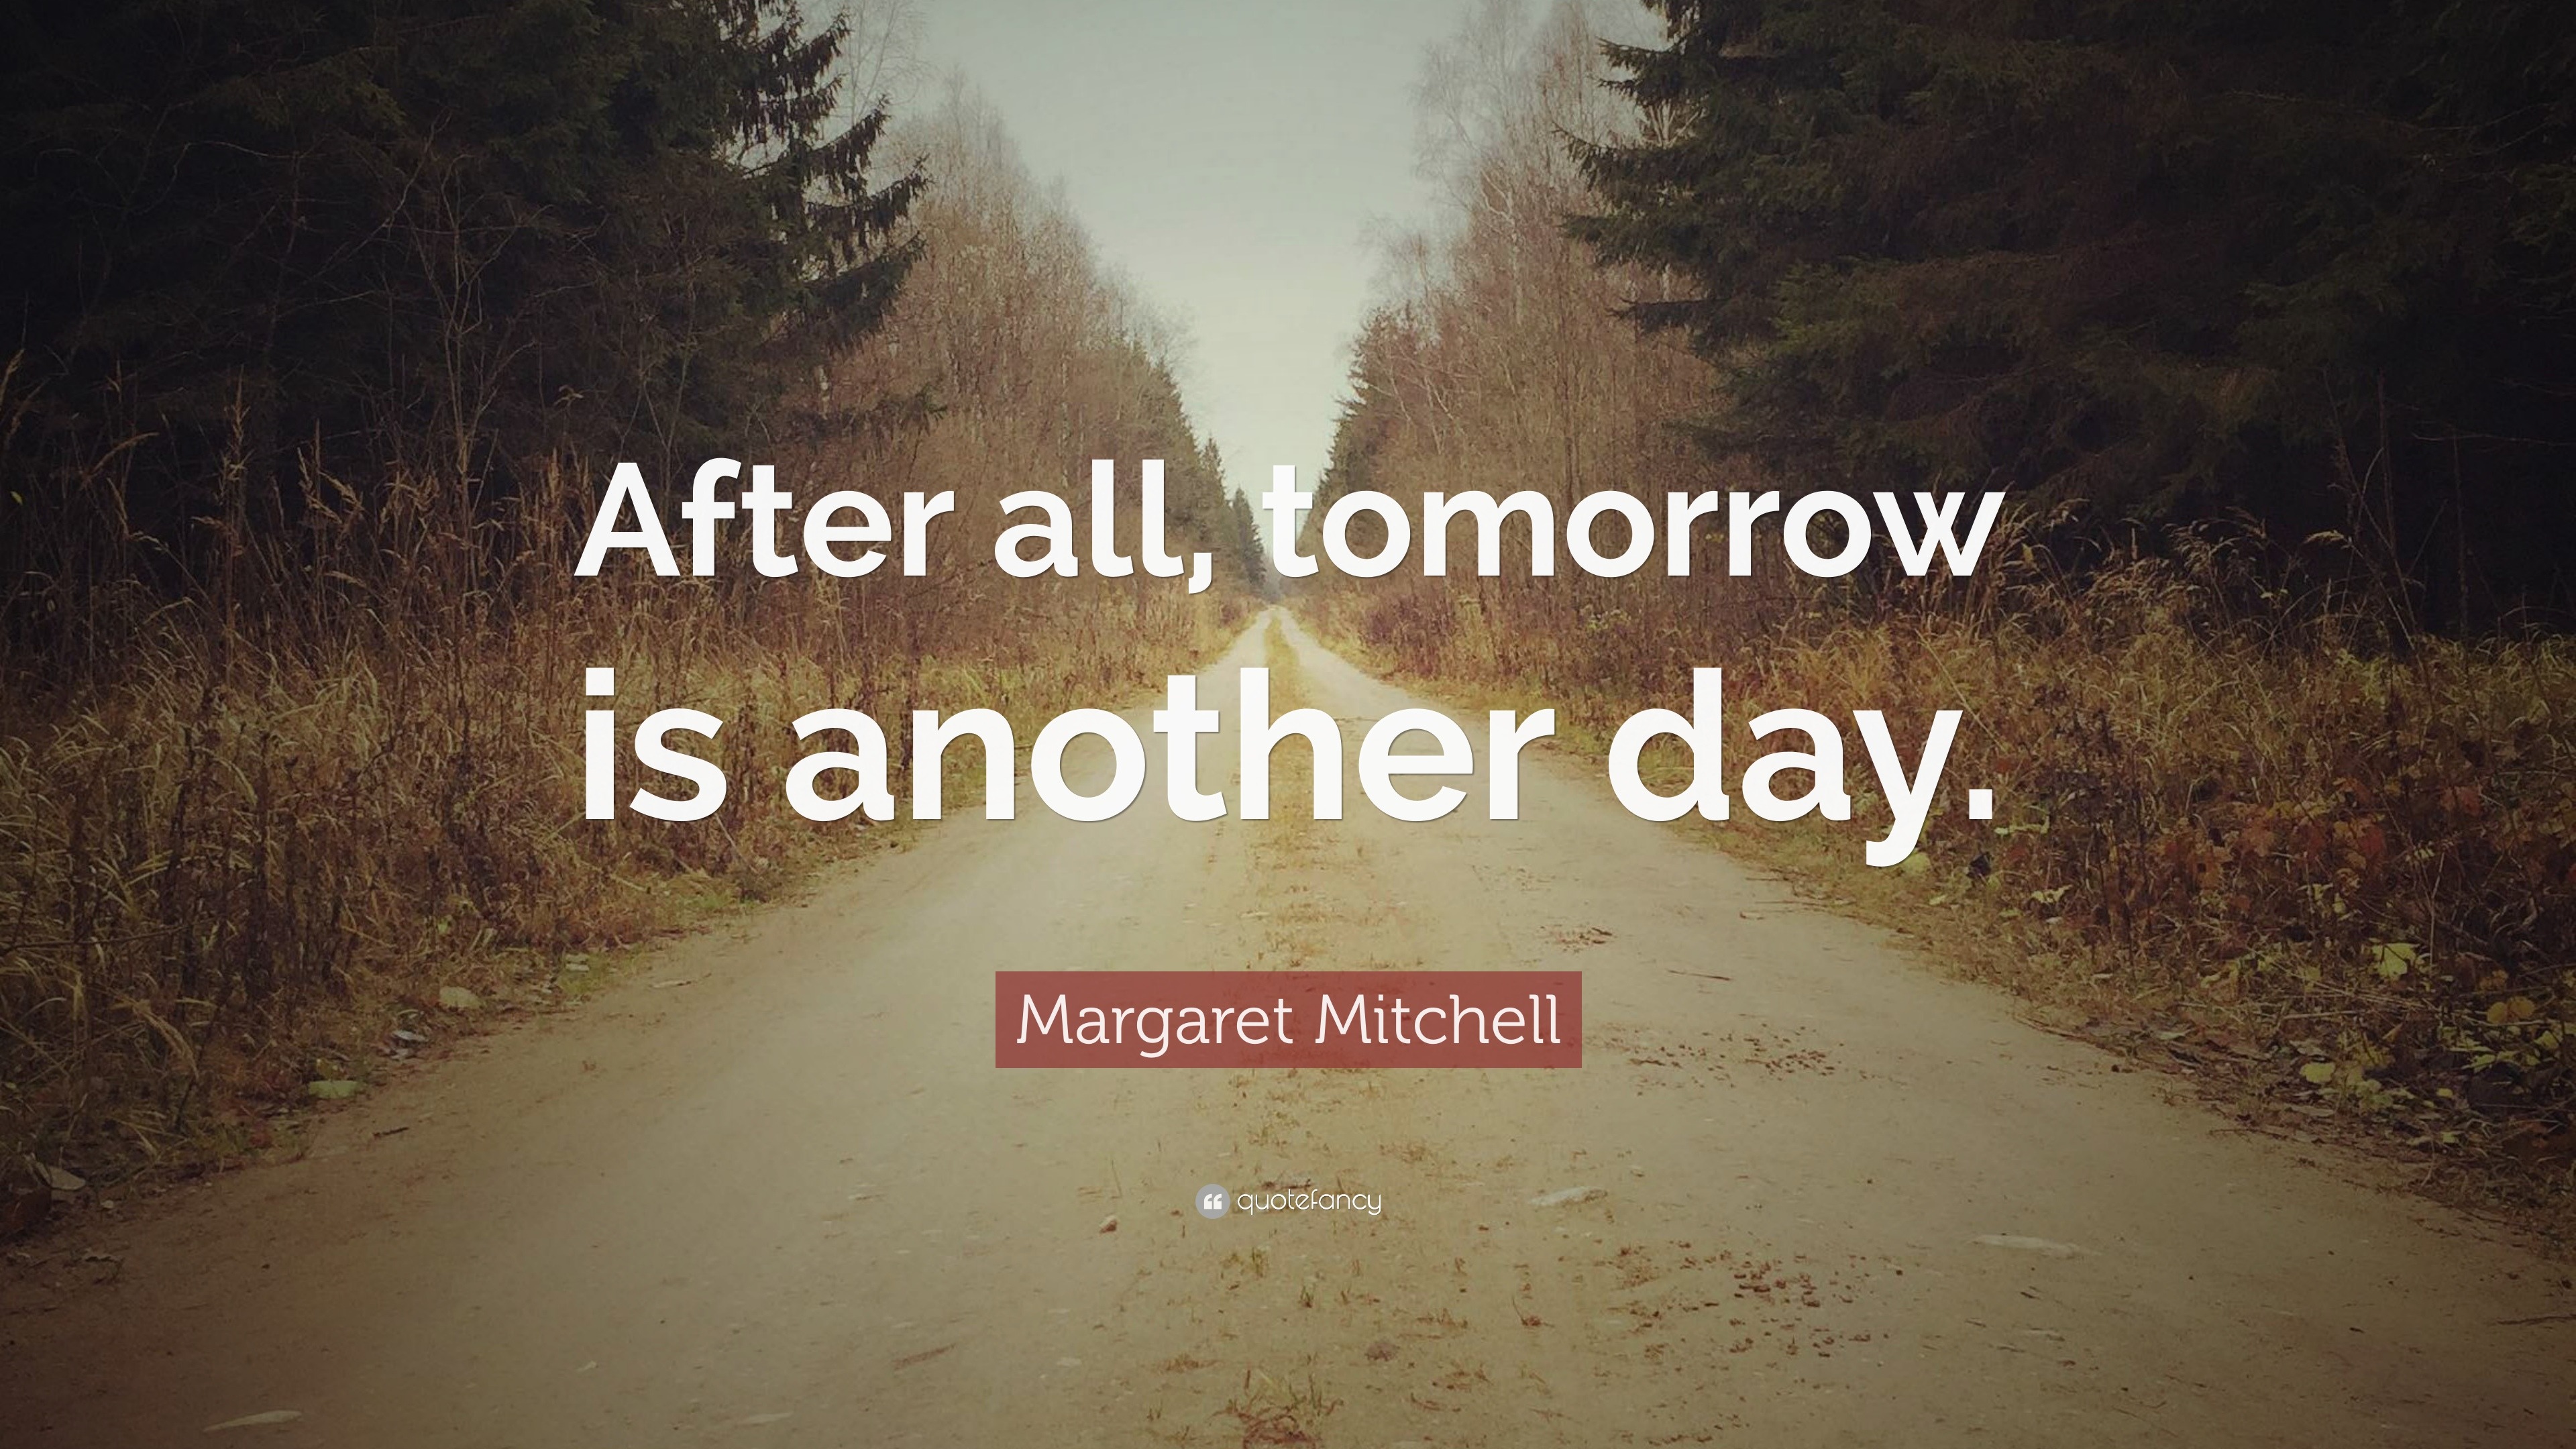 Margaret Mitchell Quote: "After all, tomorrow is another day."